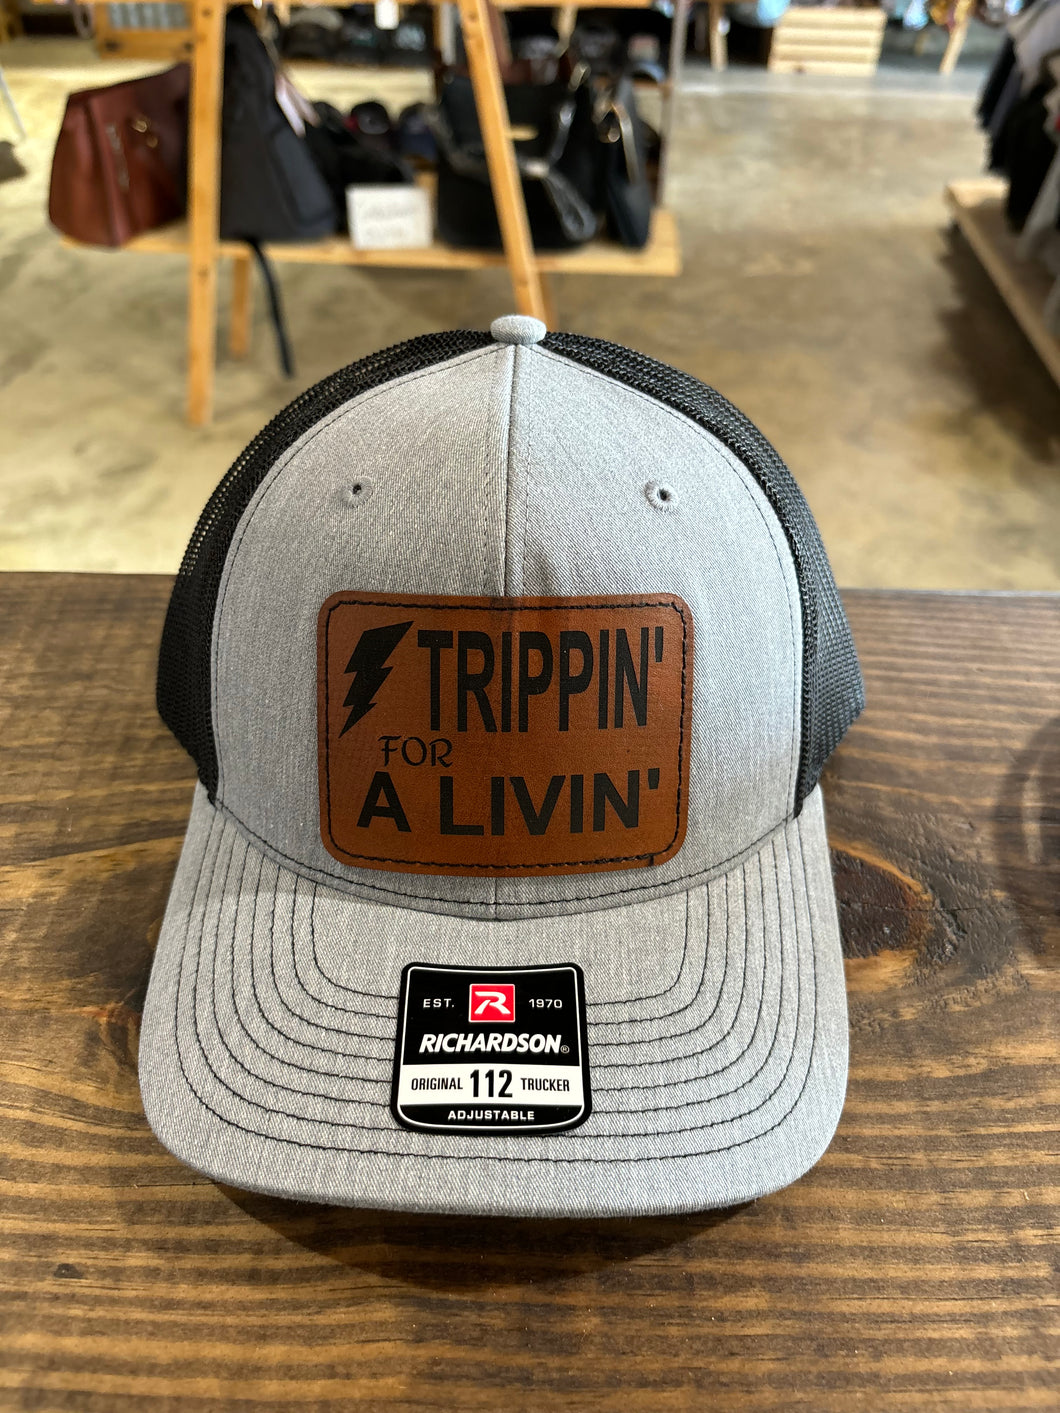 STrippin for a livin (electrician) guy baseball hat